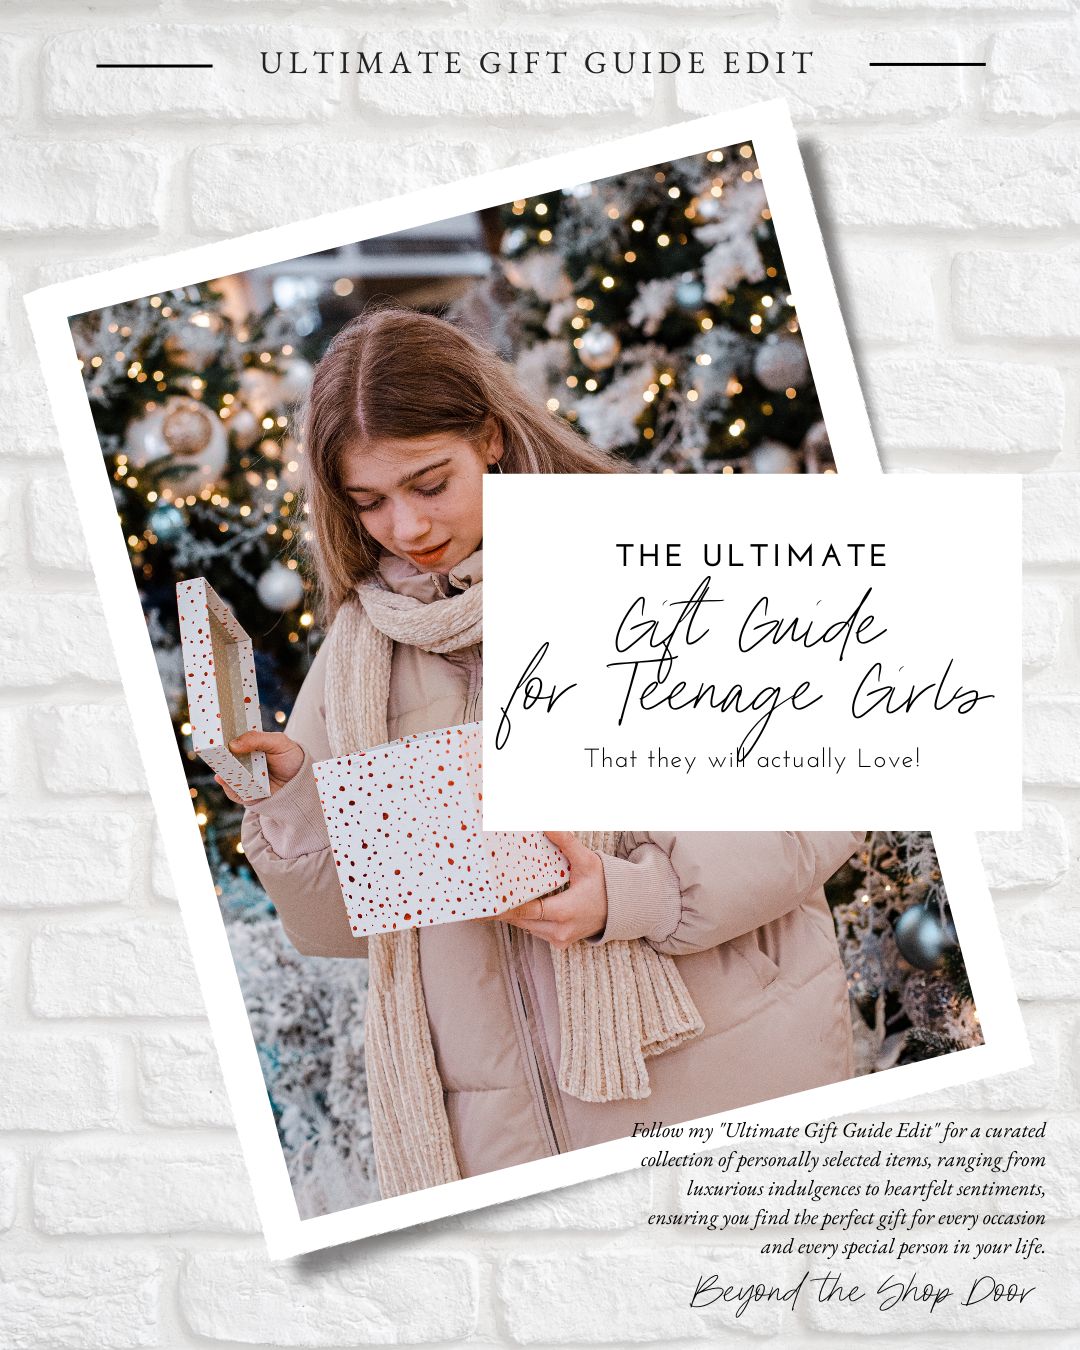 Ultimate Gift Guide for Teenage Girls in 2019 - Beyond The Shop Door